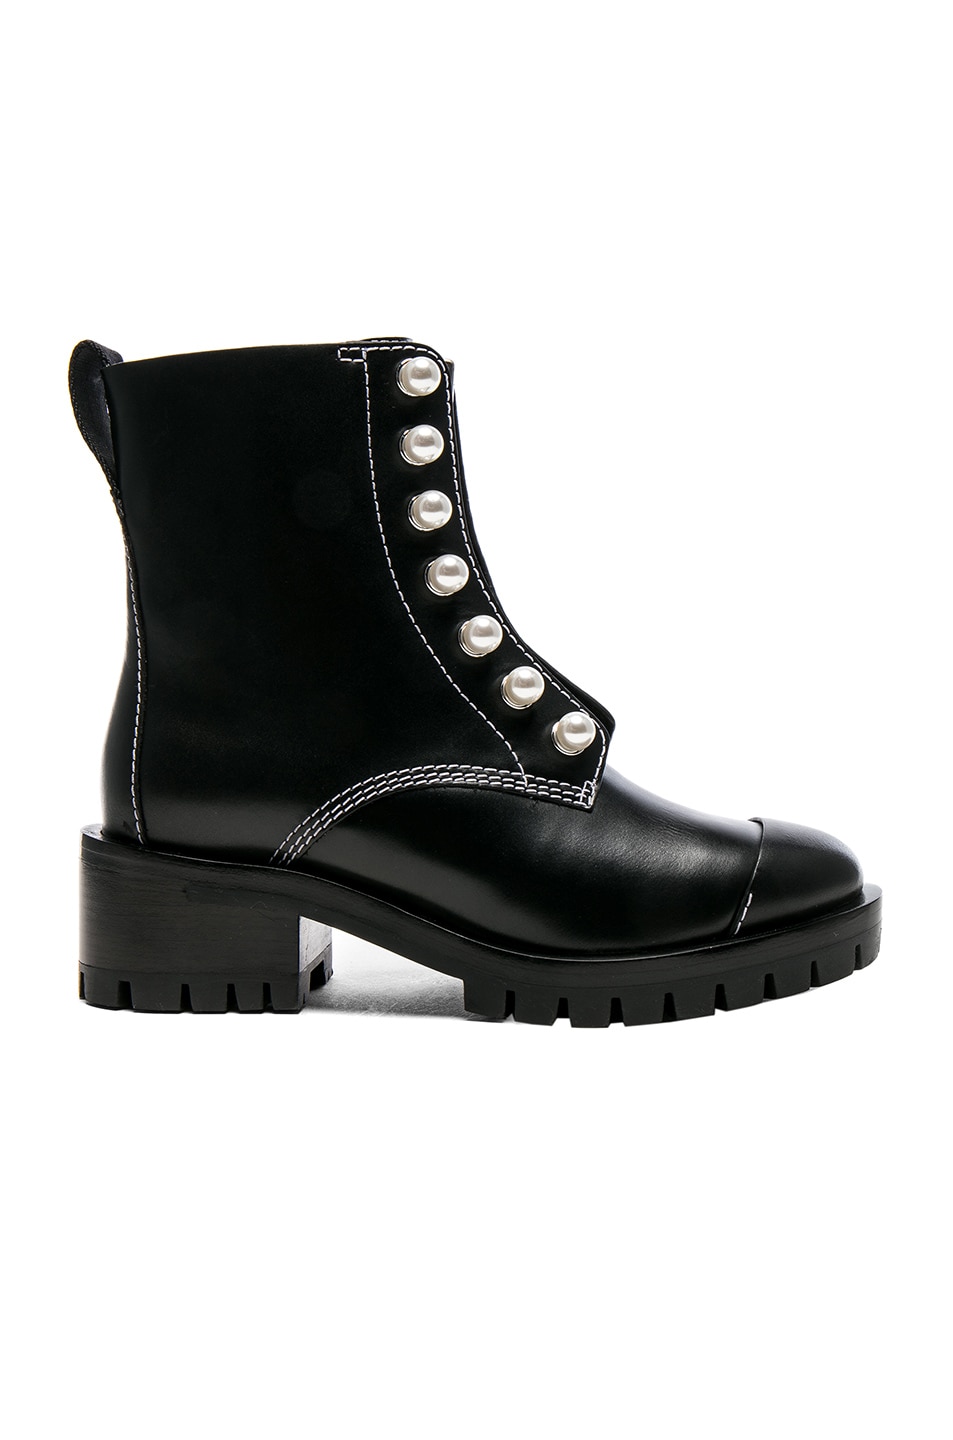 Image 1 of 3.1 phillip lim Lug Sole Zipper Leather Boots with Pearls in Black